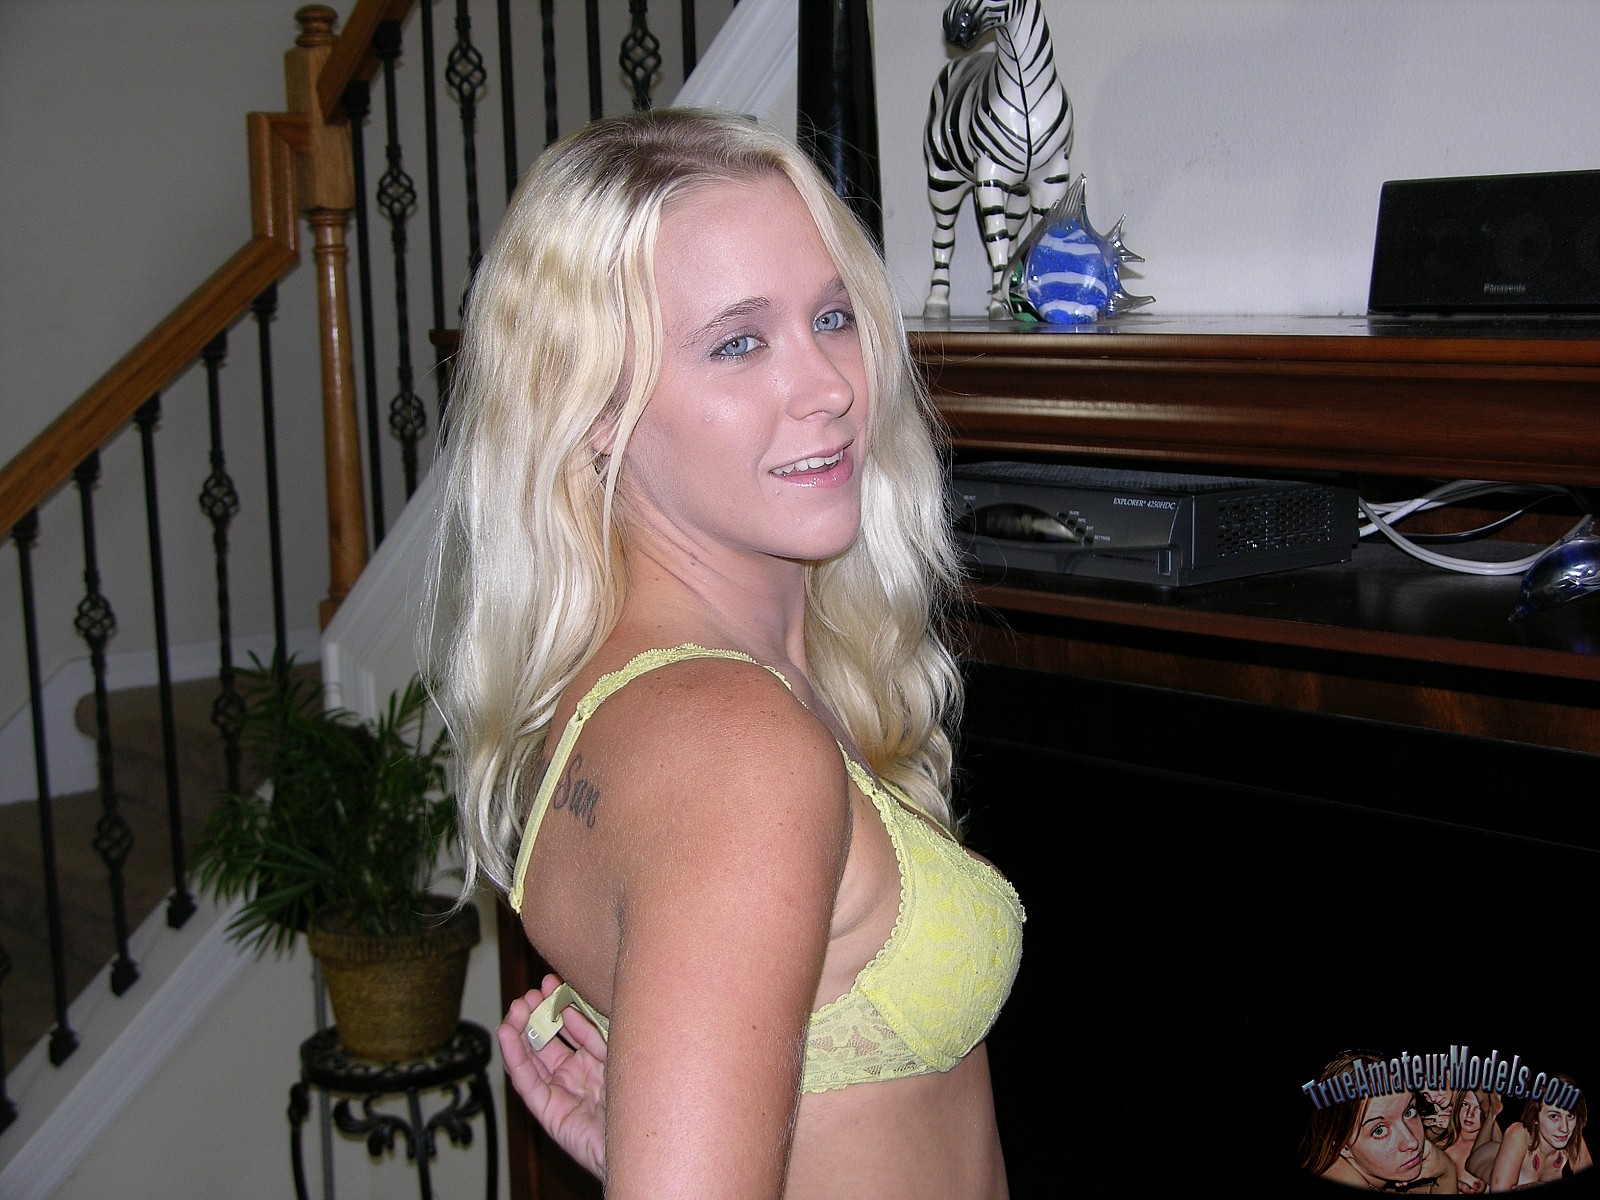 Amateur Nude Blonde Girl pic pic